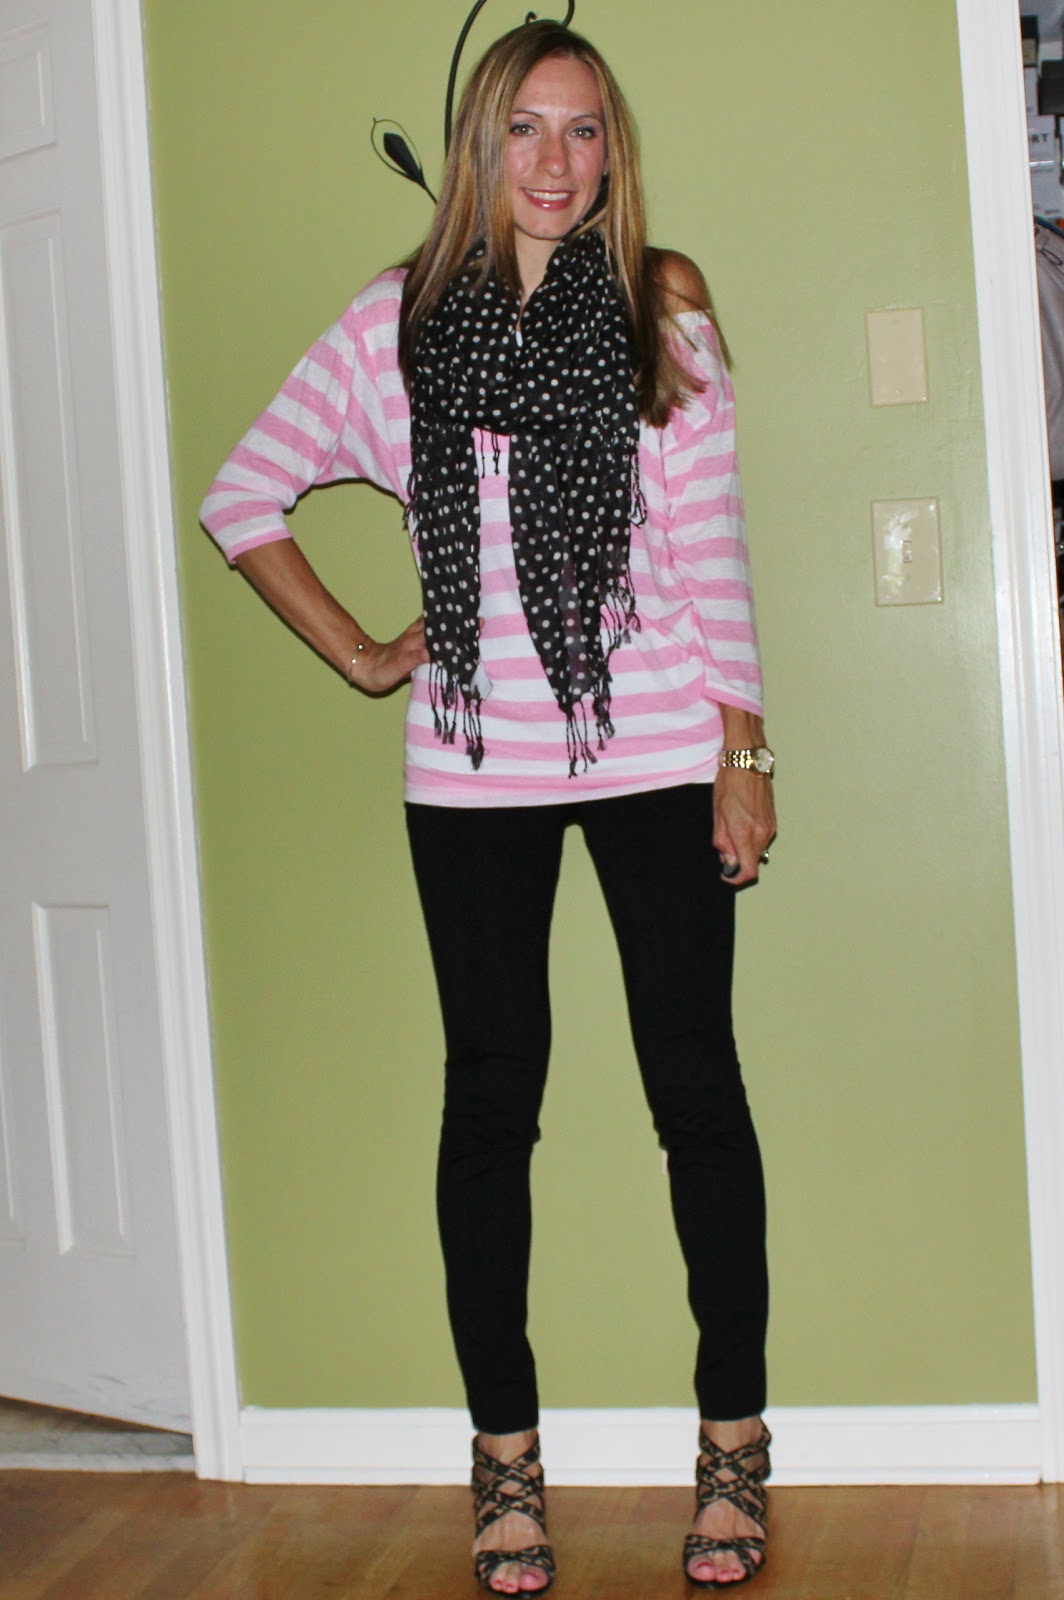 Casual Chic Mom: Pink Stipes  Black and White Polka Dots!